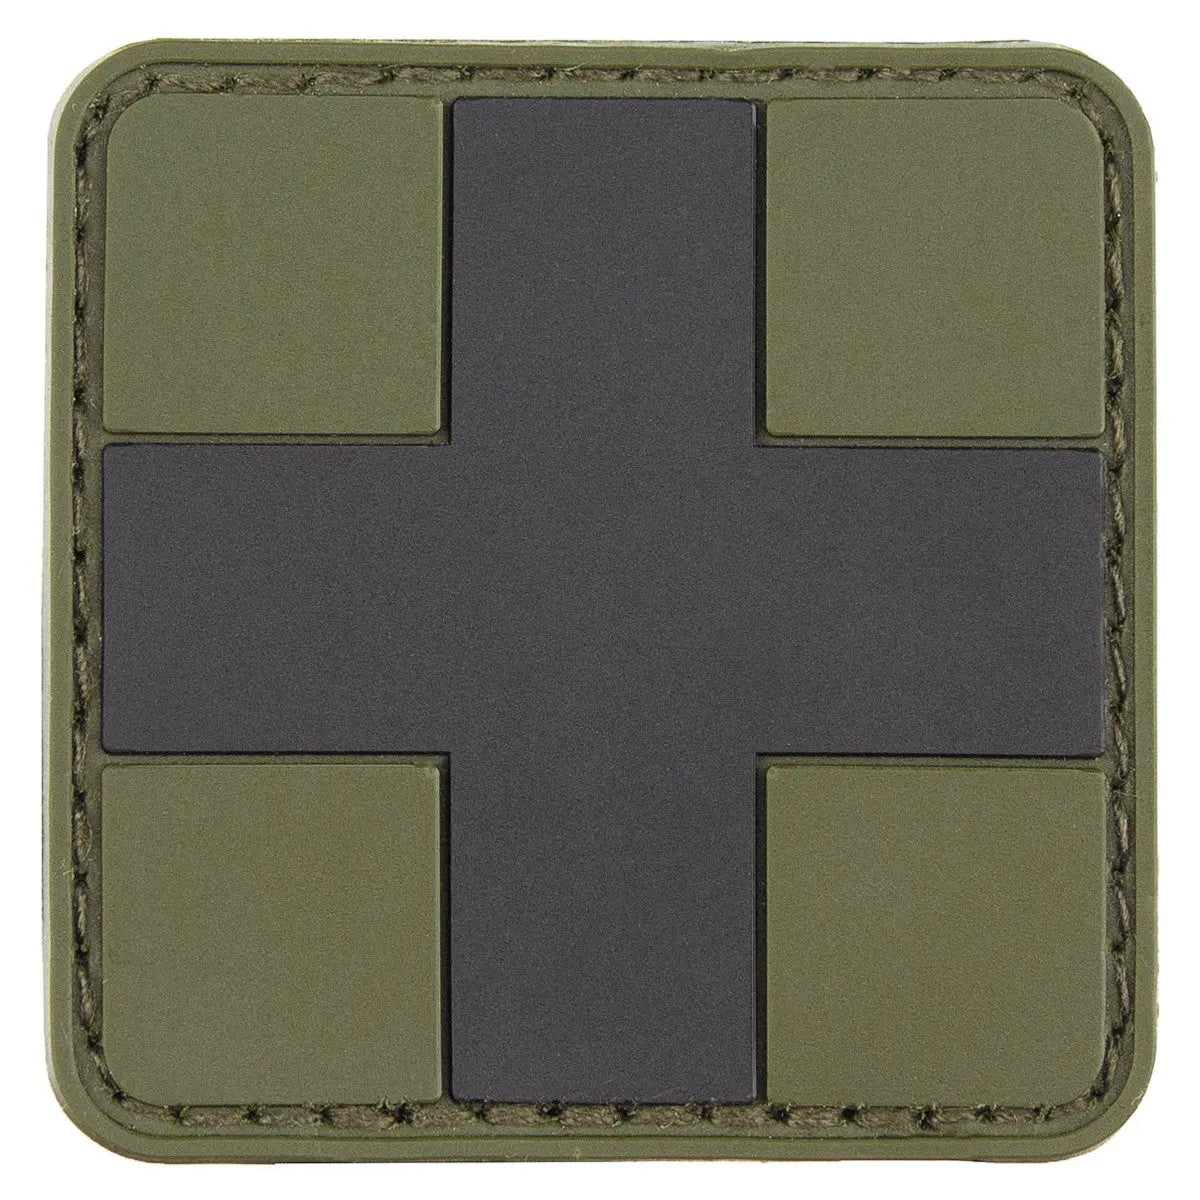 Velcro Patch, "FIRST AID", OD green-black, 3D, 5 x5 cm